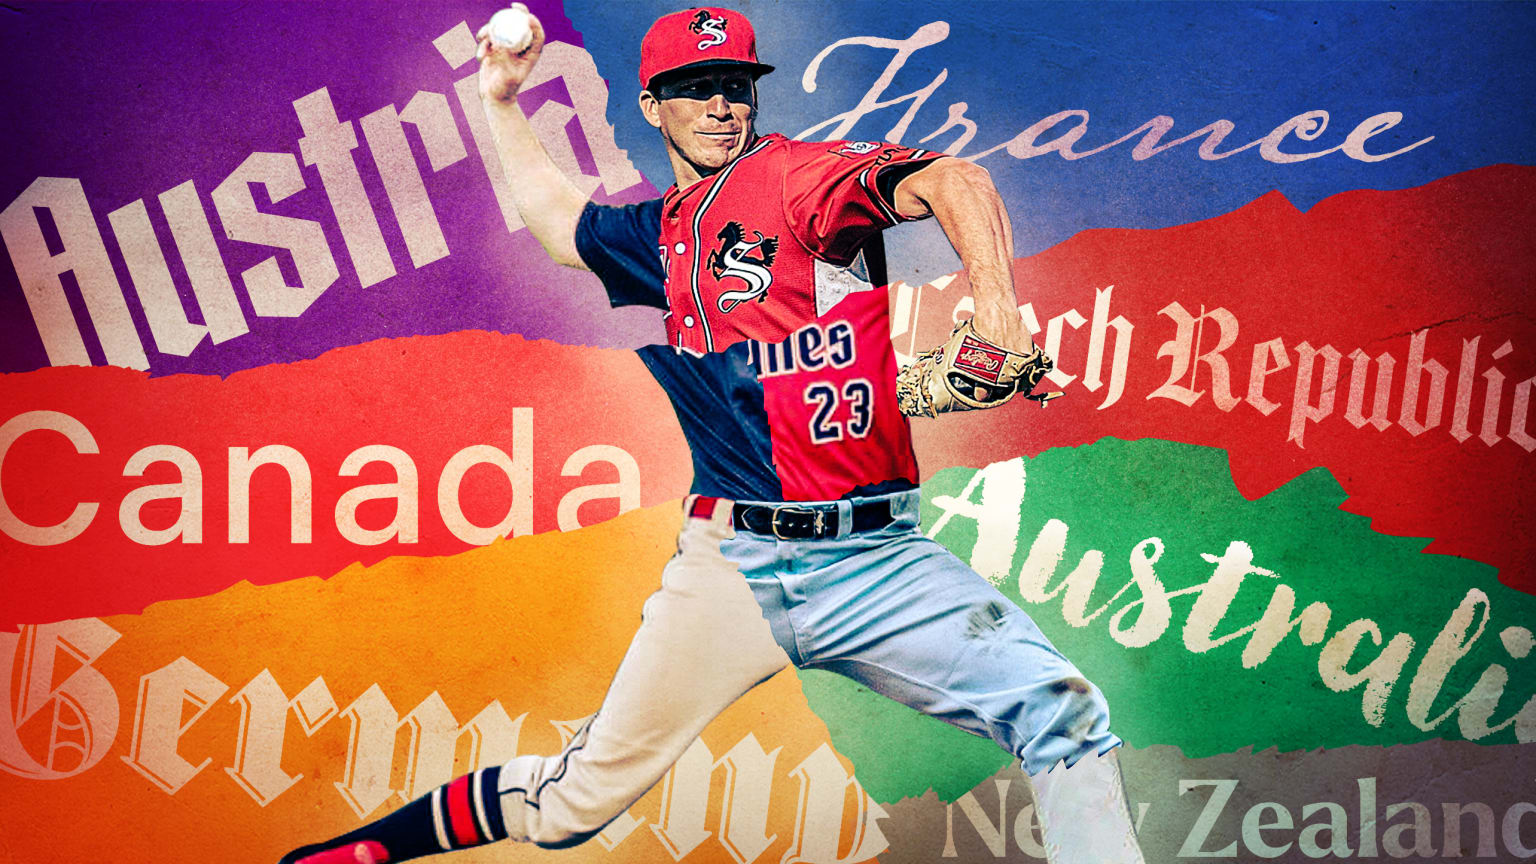 A photo illustration shows Jimmy Jensen pitching in various uniforms with names of countries where he has played